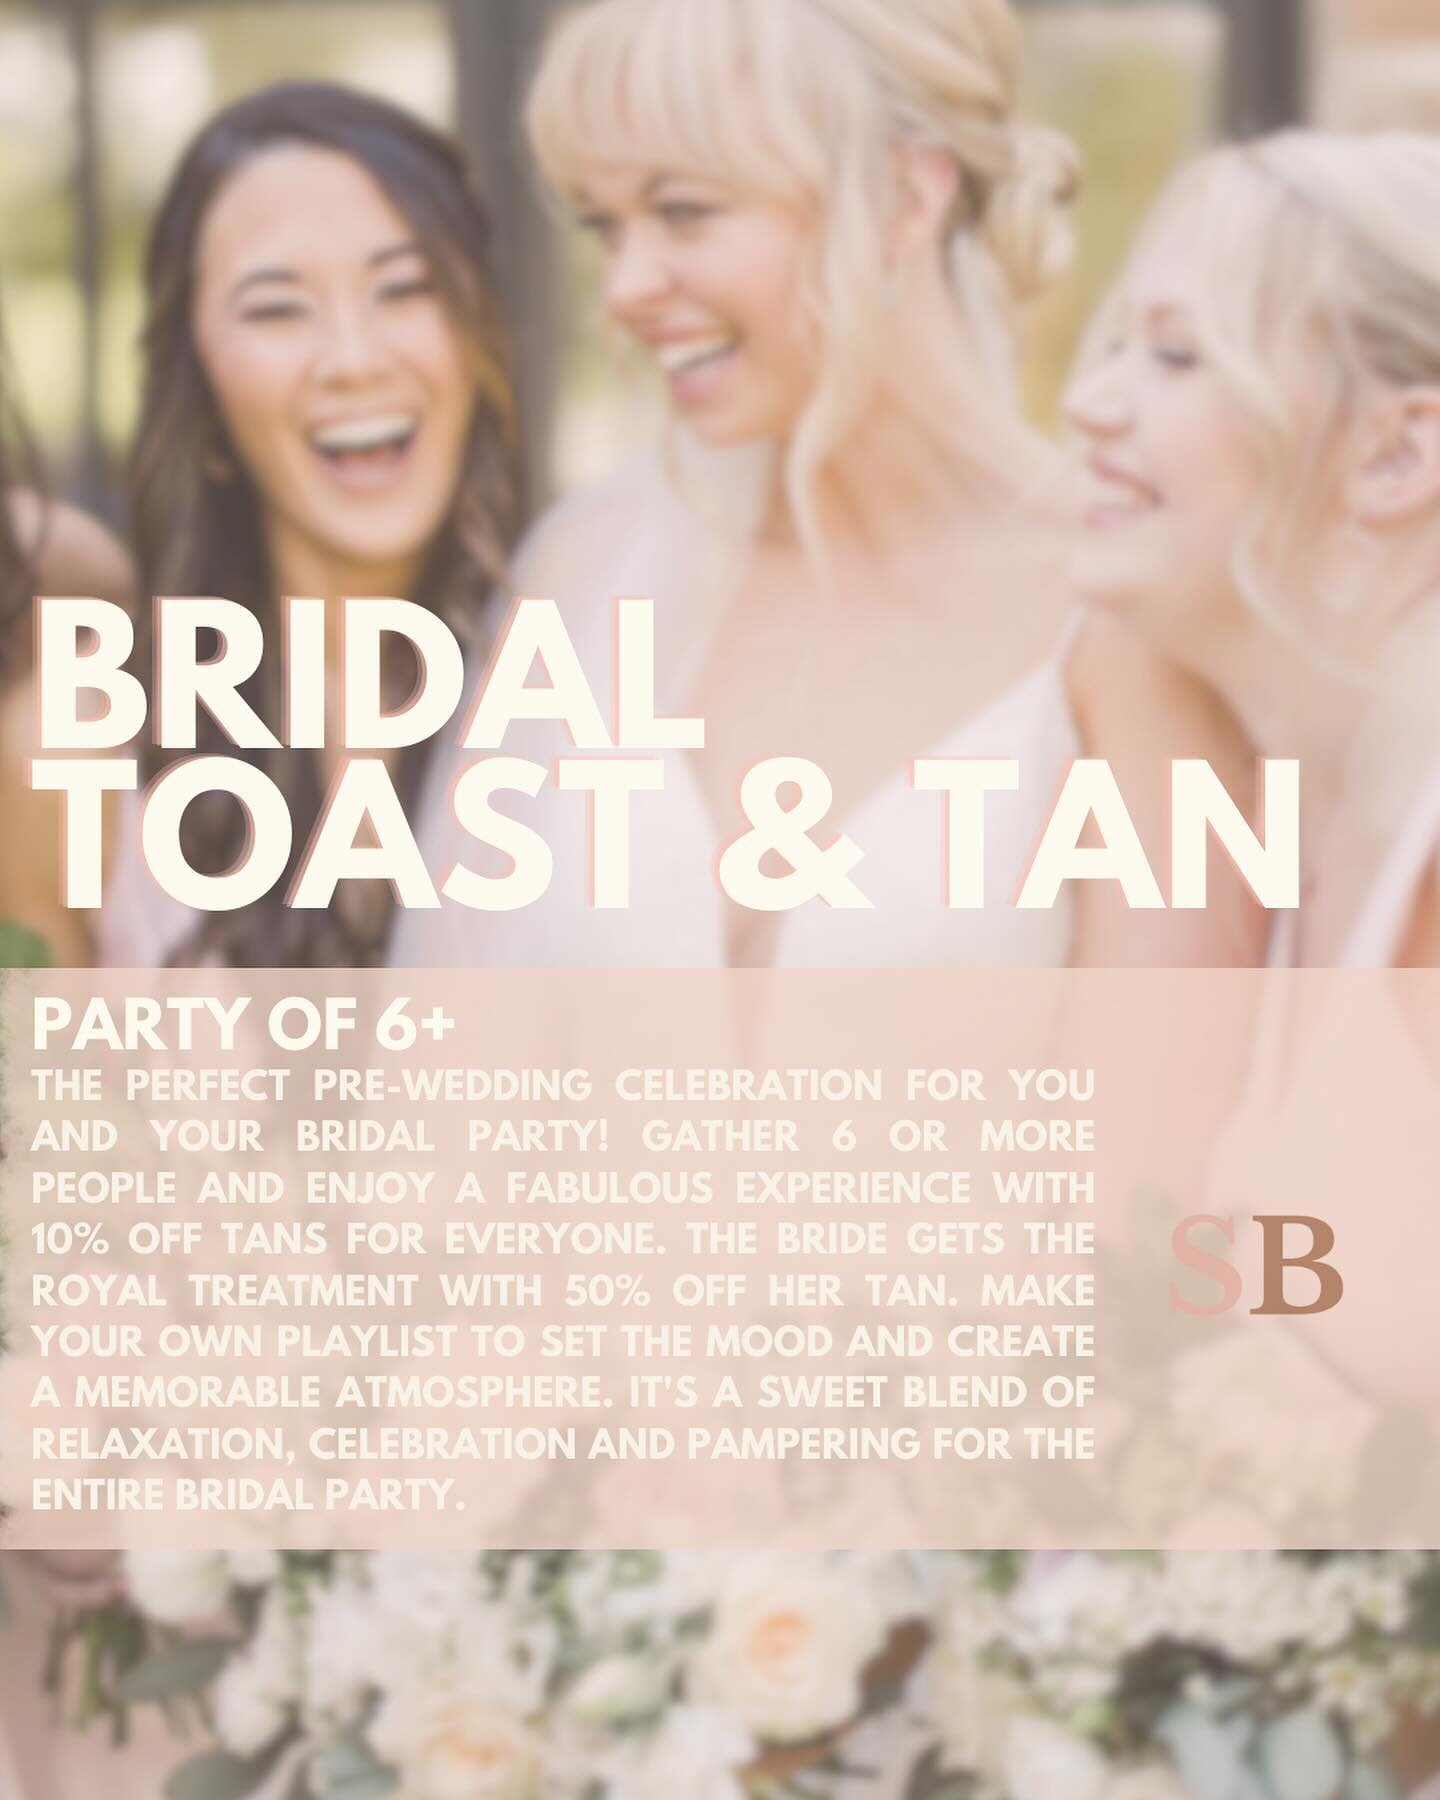 Wedding season is around the corner, and we&rsquo;re SO EXCITED to celebrate with you 💖

INTRODUCING: BRIDAL TOAST &amp; TAN
To book: email - ashley@sweetlybronzed.com

#columbusbride #columbusbrides #614bride #columbusweddings #columbuswedding #col